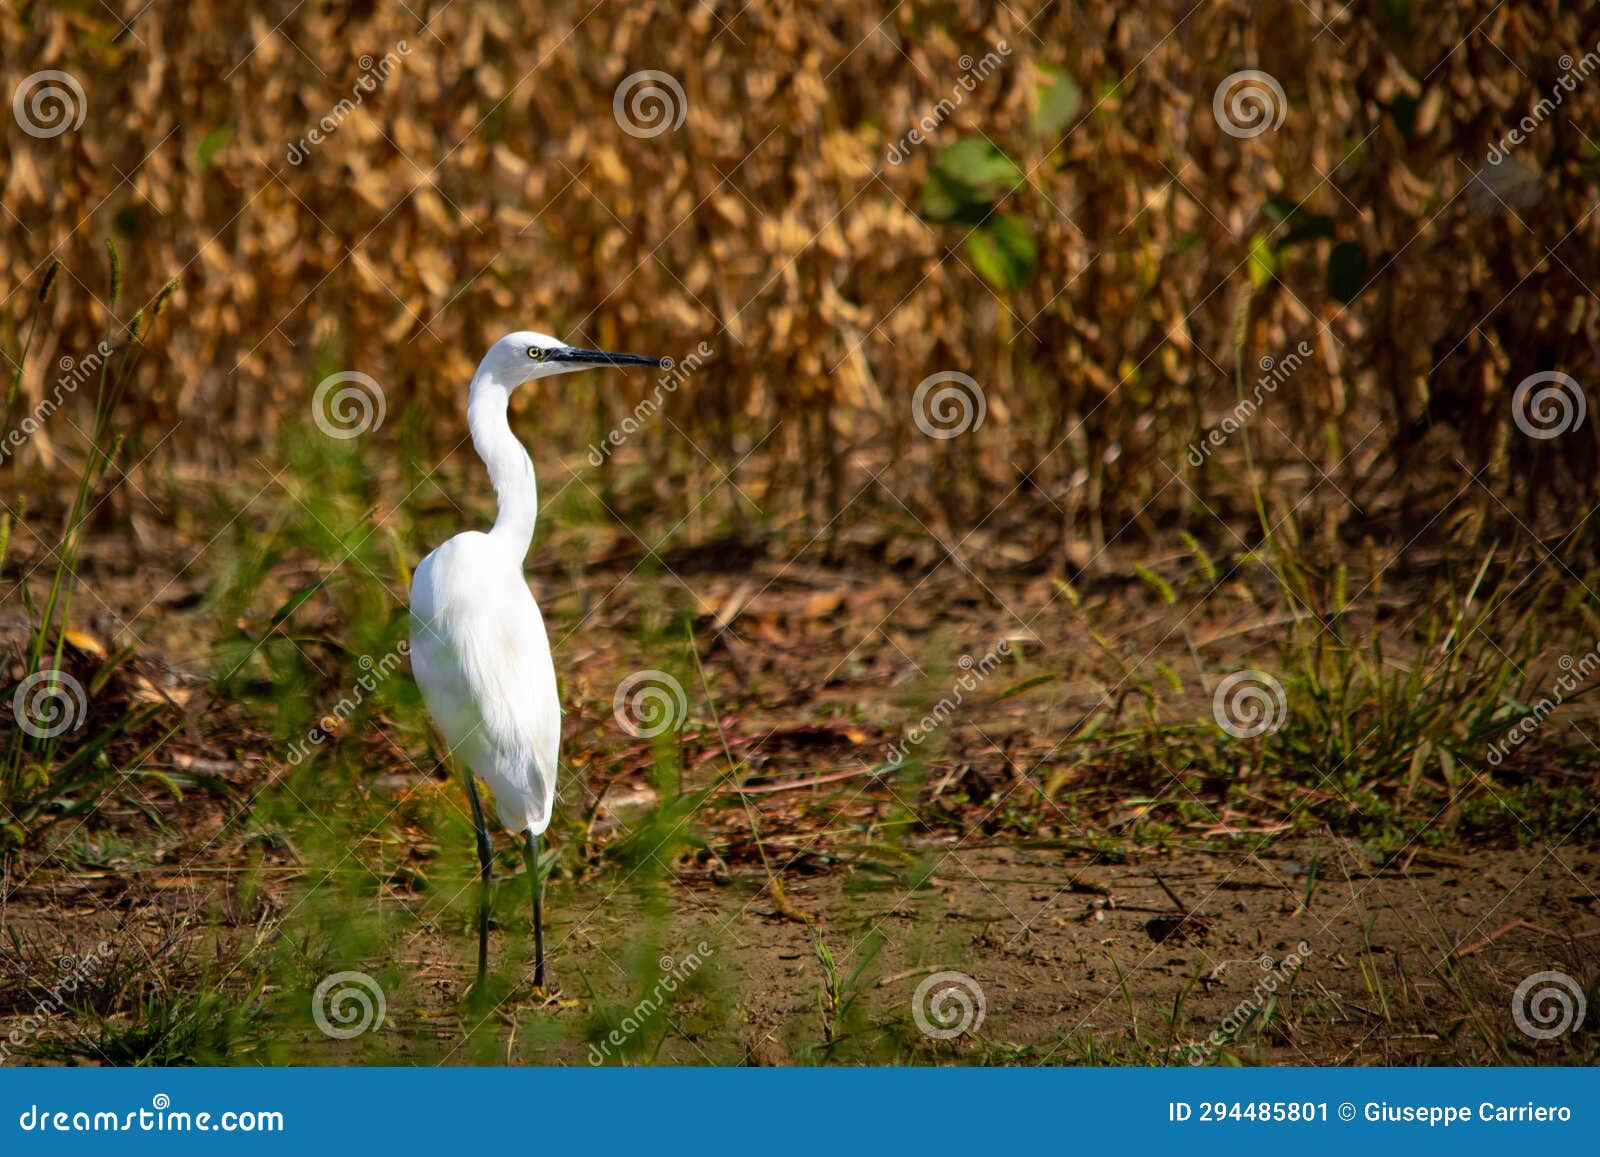 the gray heron is a bird belonging to the ardeidae family.